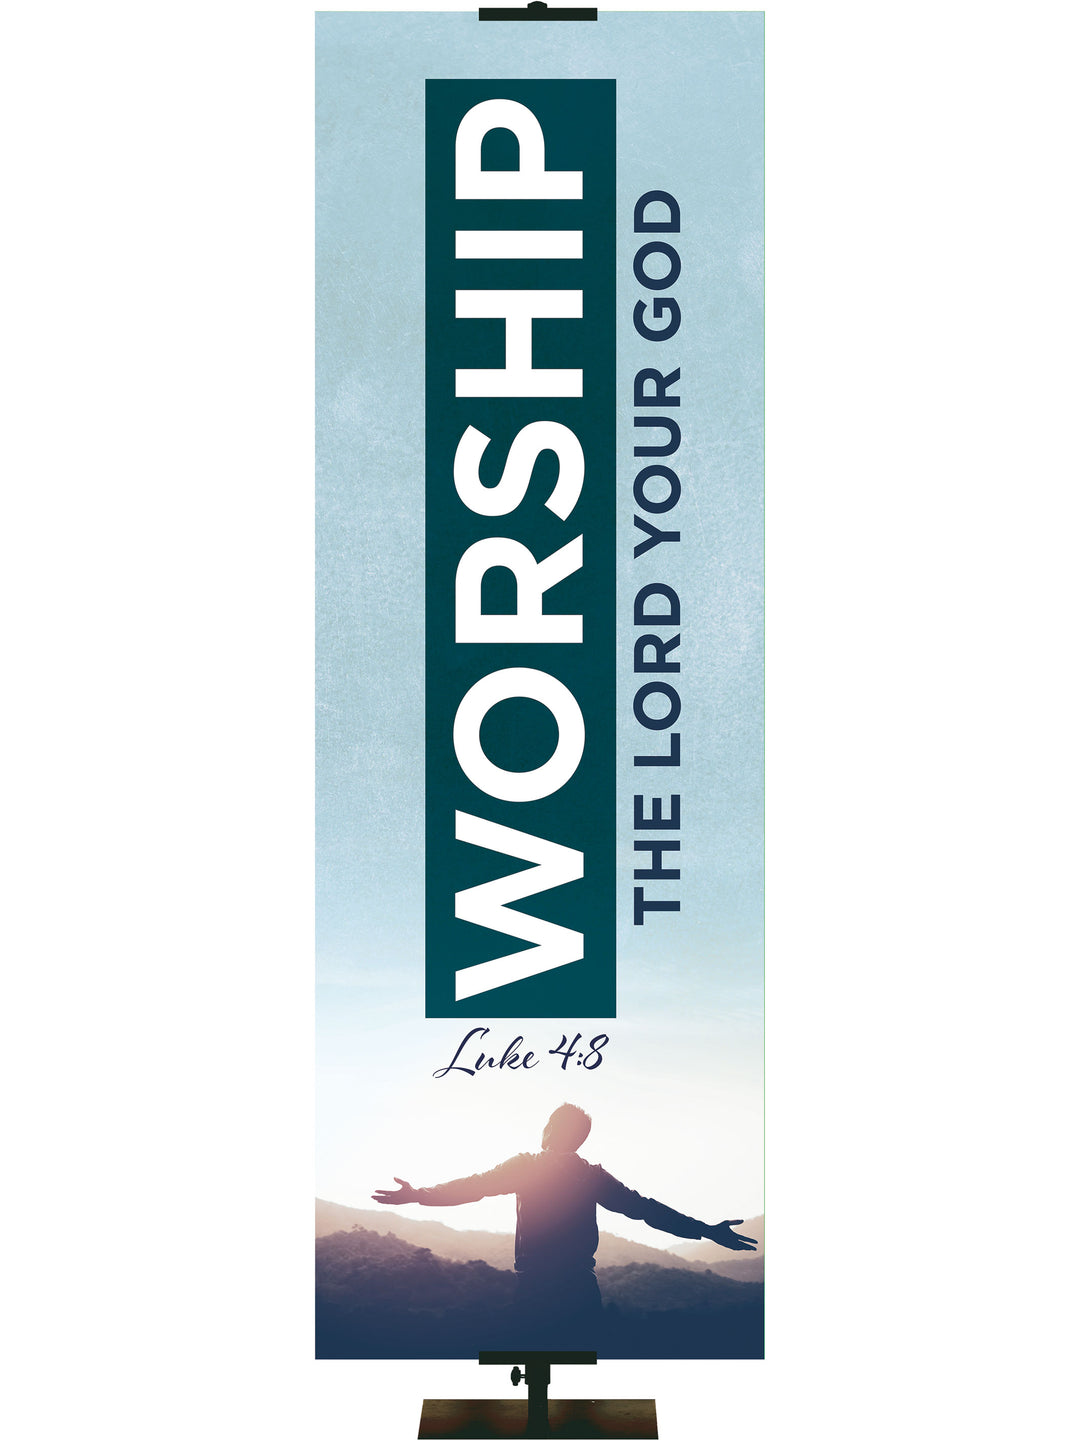 Worship The Lord Your God. Luke 4:8 Church Banner with hands outstretched to mountain sunrise